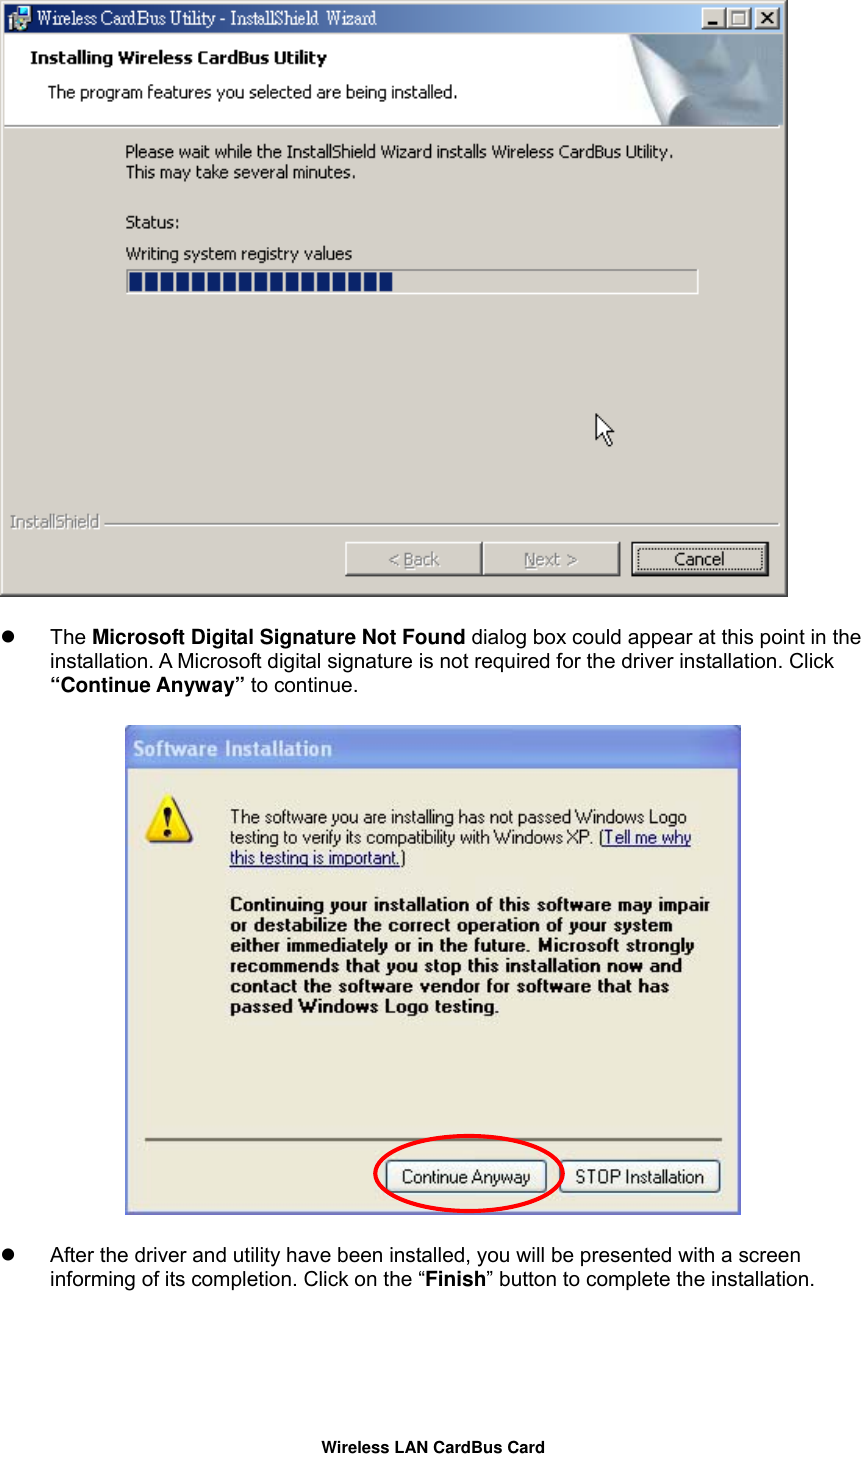     The Microsoft Digital Signature Not Found dialog box could appear at this point in the installation. A Microsoft digital signature is not required for the driver installation. Click “Continue Anyway” to continue.        After the driver and utility have been installed, you will be presented with a screen informing of its completion. Click on the “Finish” button to complete the installation. Wireless LAN CardBus Card 